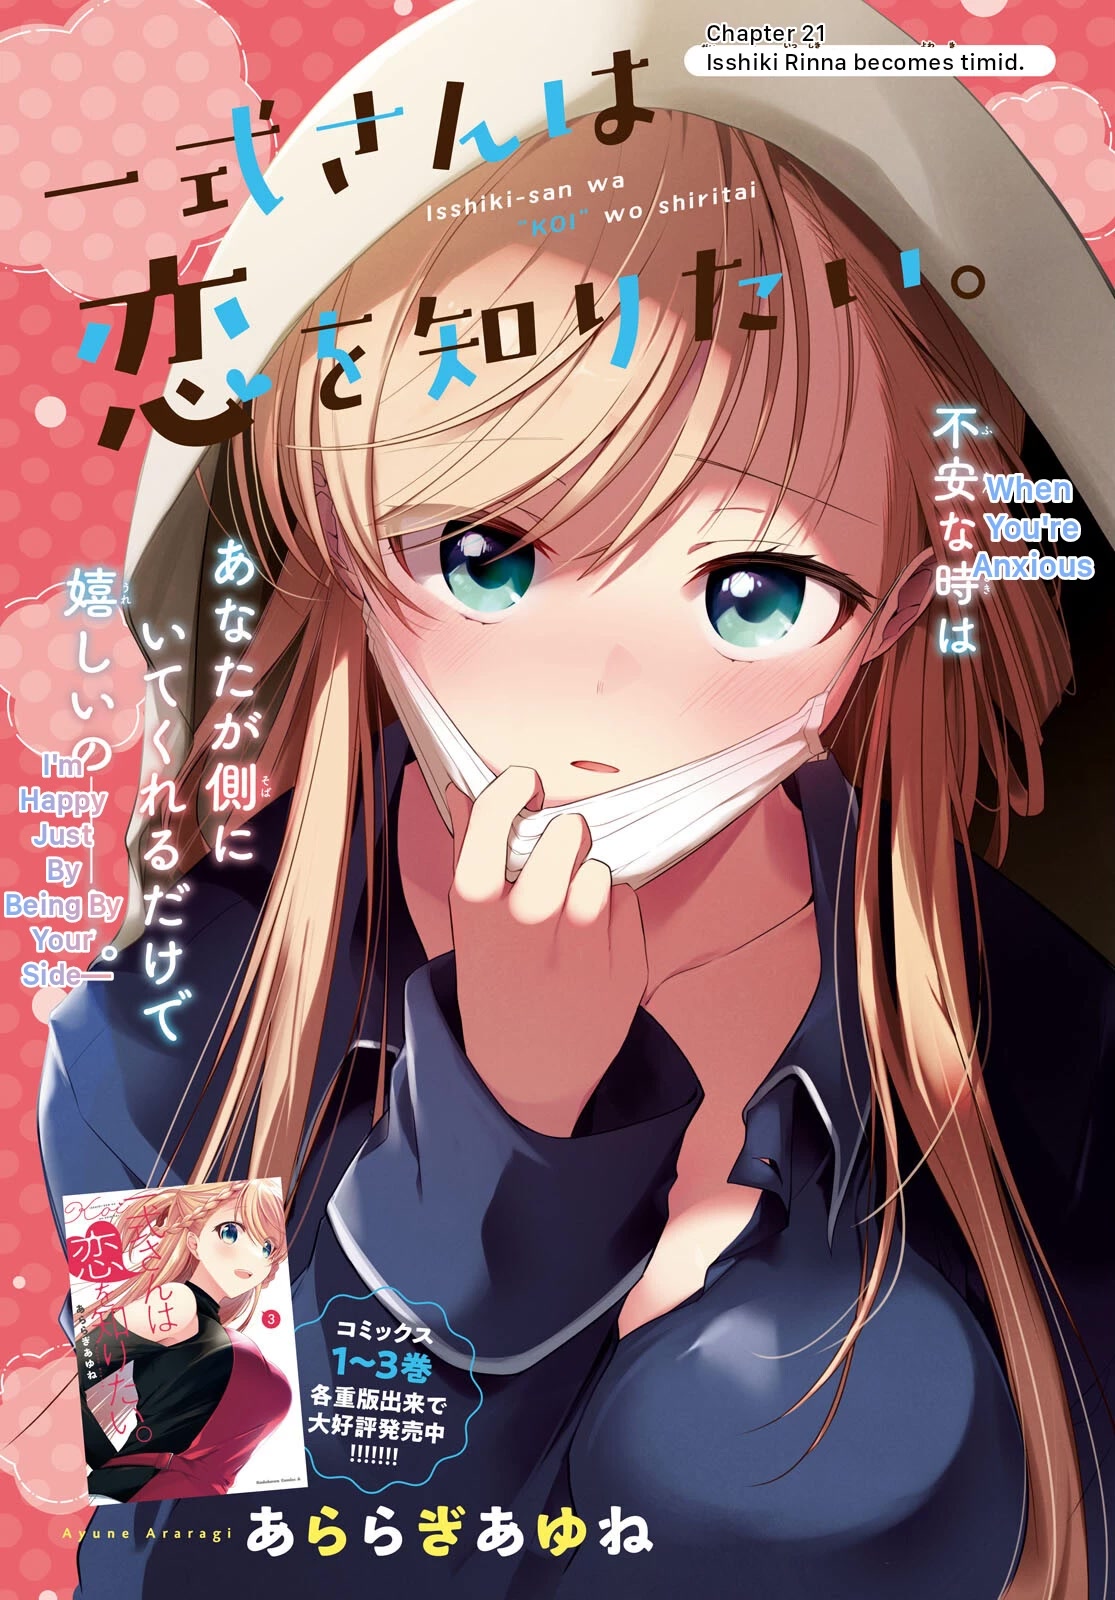 Isshiki-san Wants to Know About Love. - chapter 21 - #3